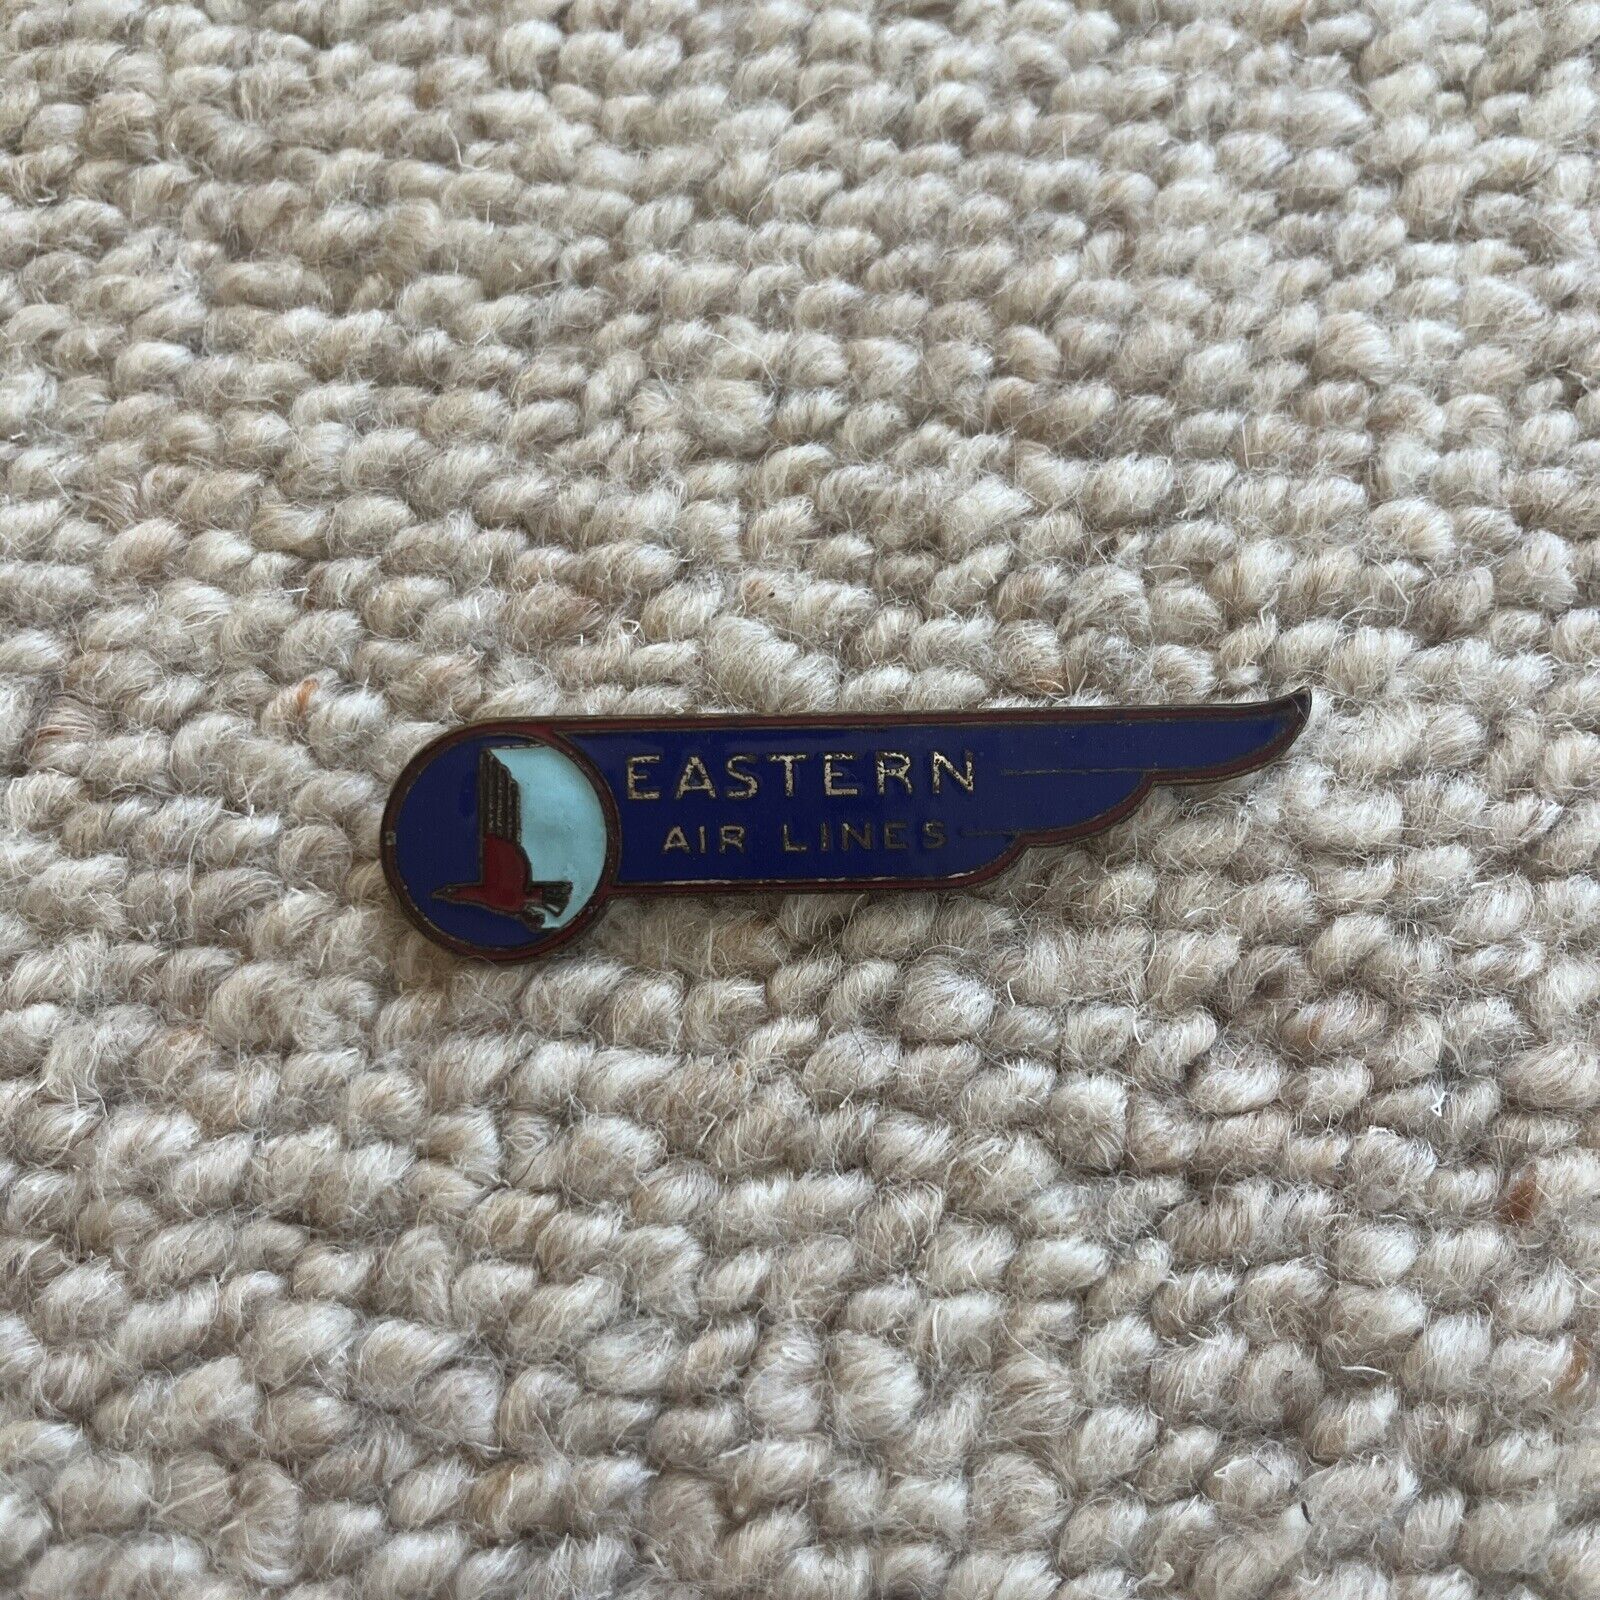 ART DECO Late 1930s EASTERN AIRLINES Agent BADGE Pin 5th ISSUE TYPE 1 Enamel